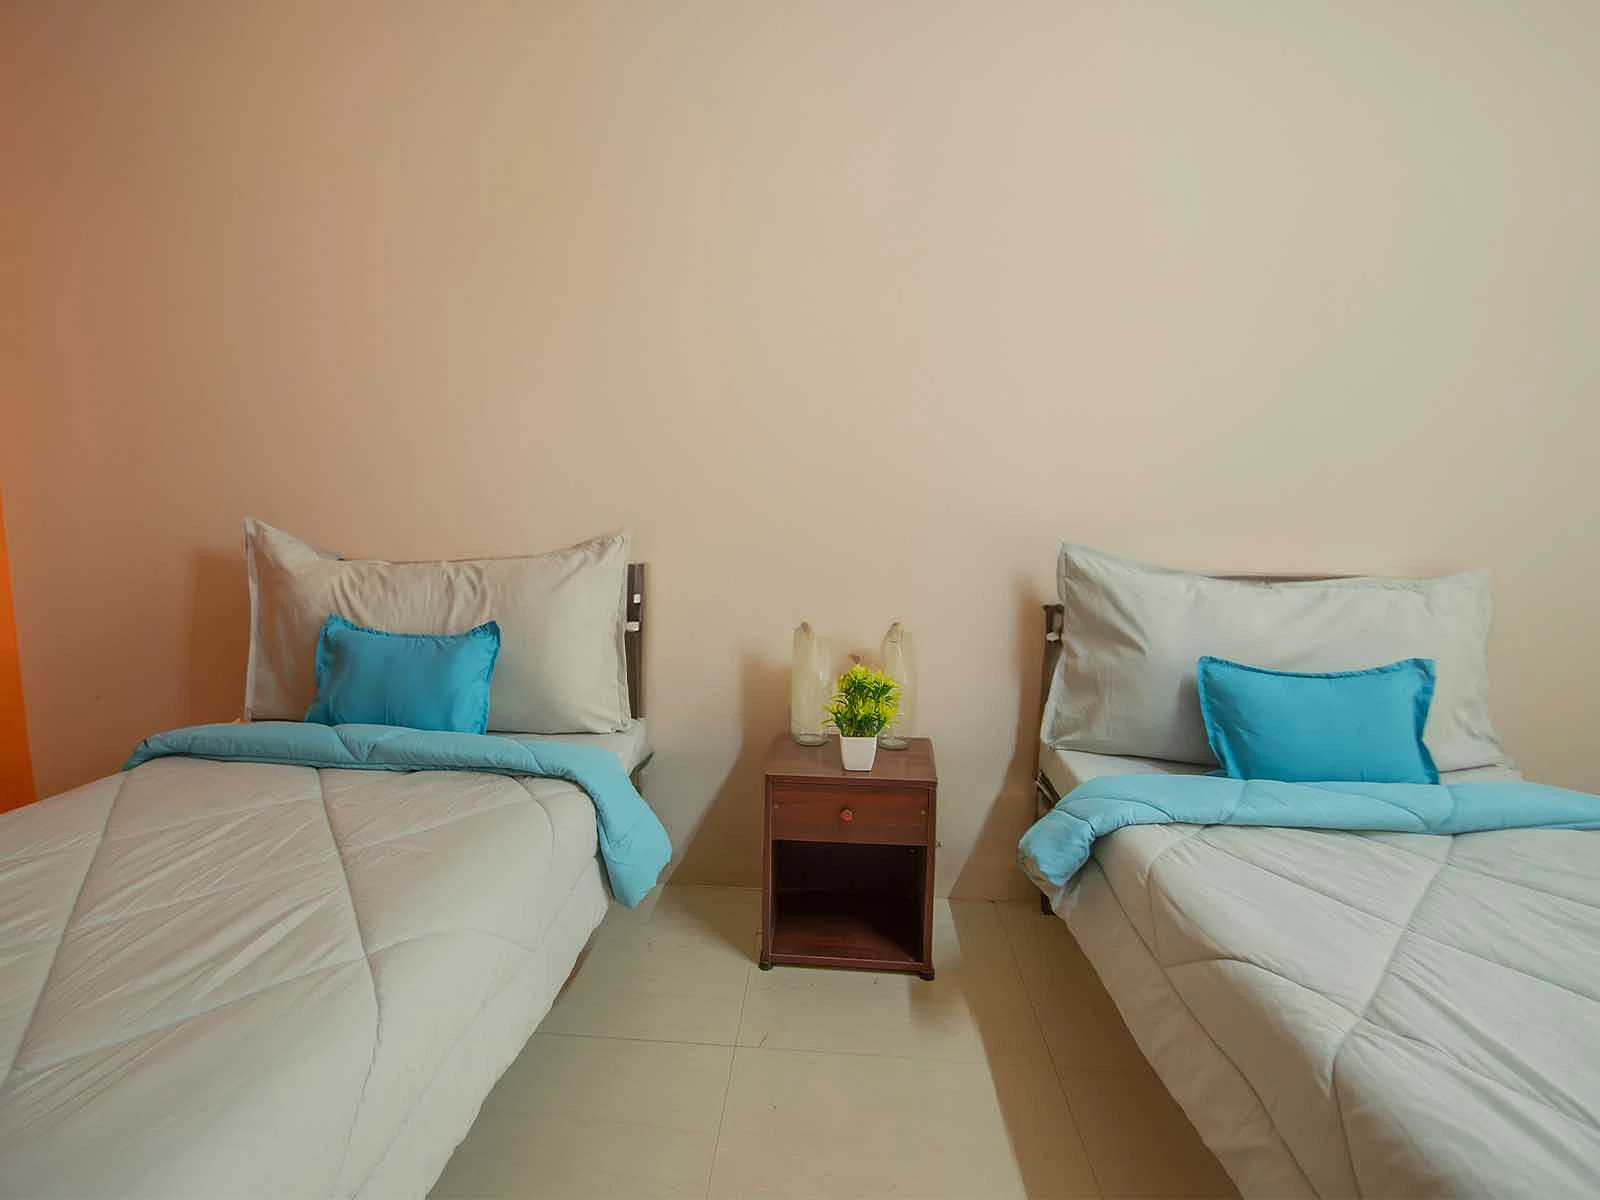 fully furnished Zolo single rooms for rent near me-check out now-Zolo Playa